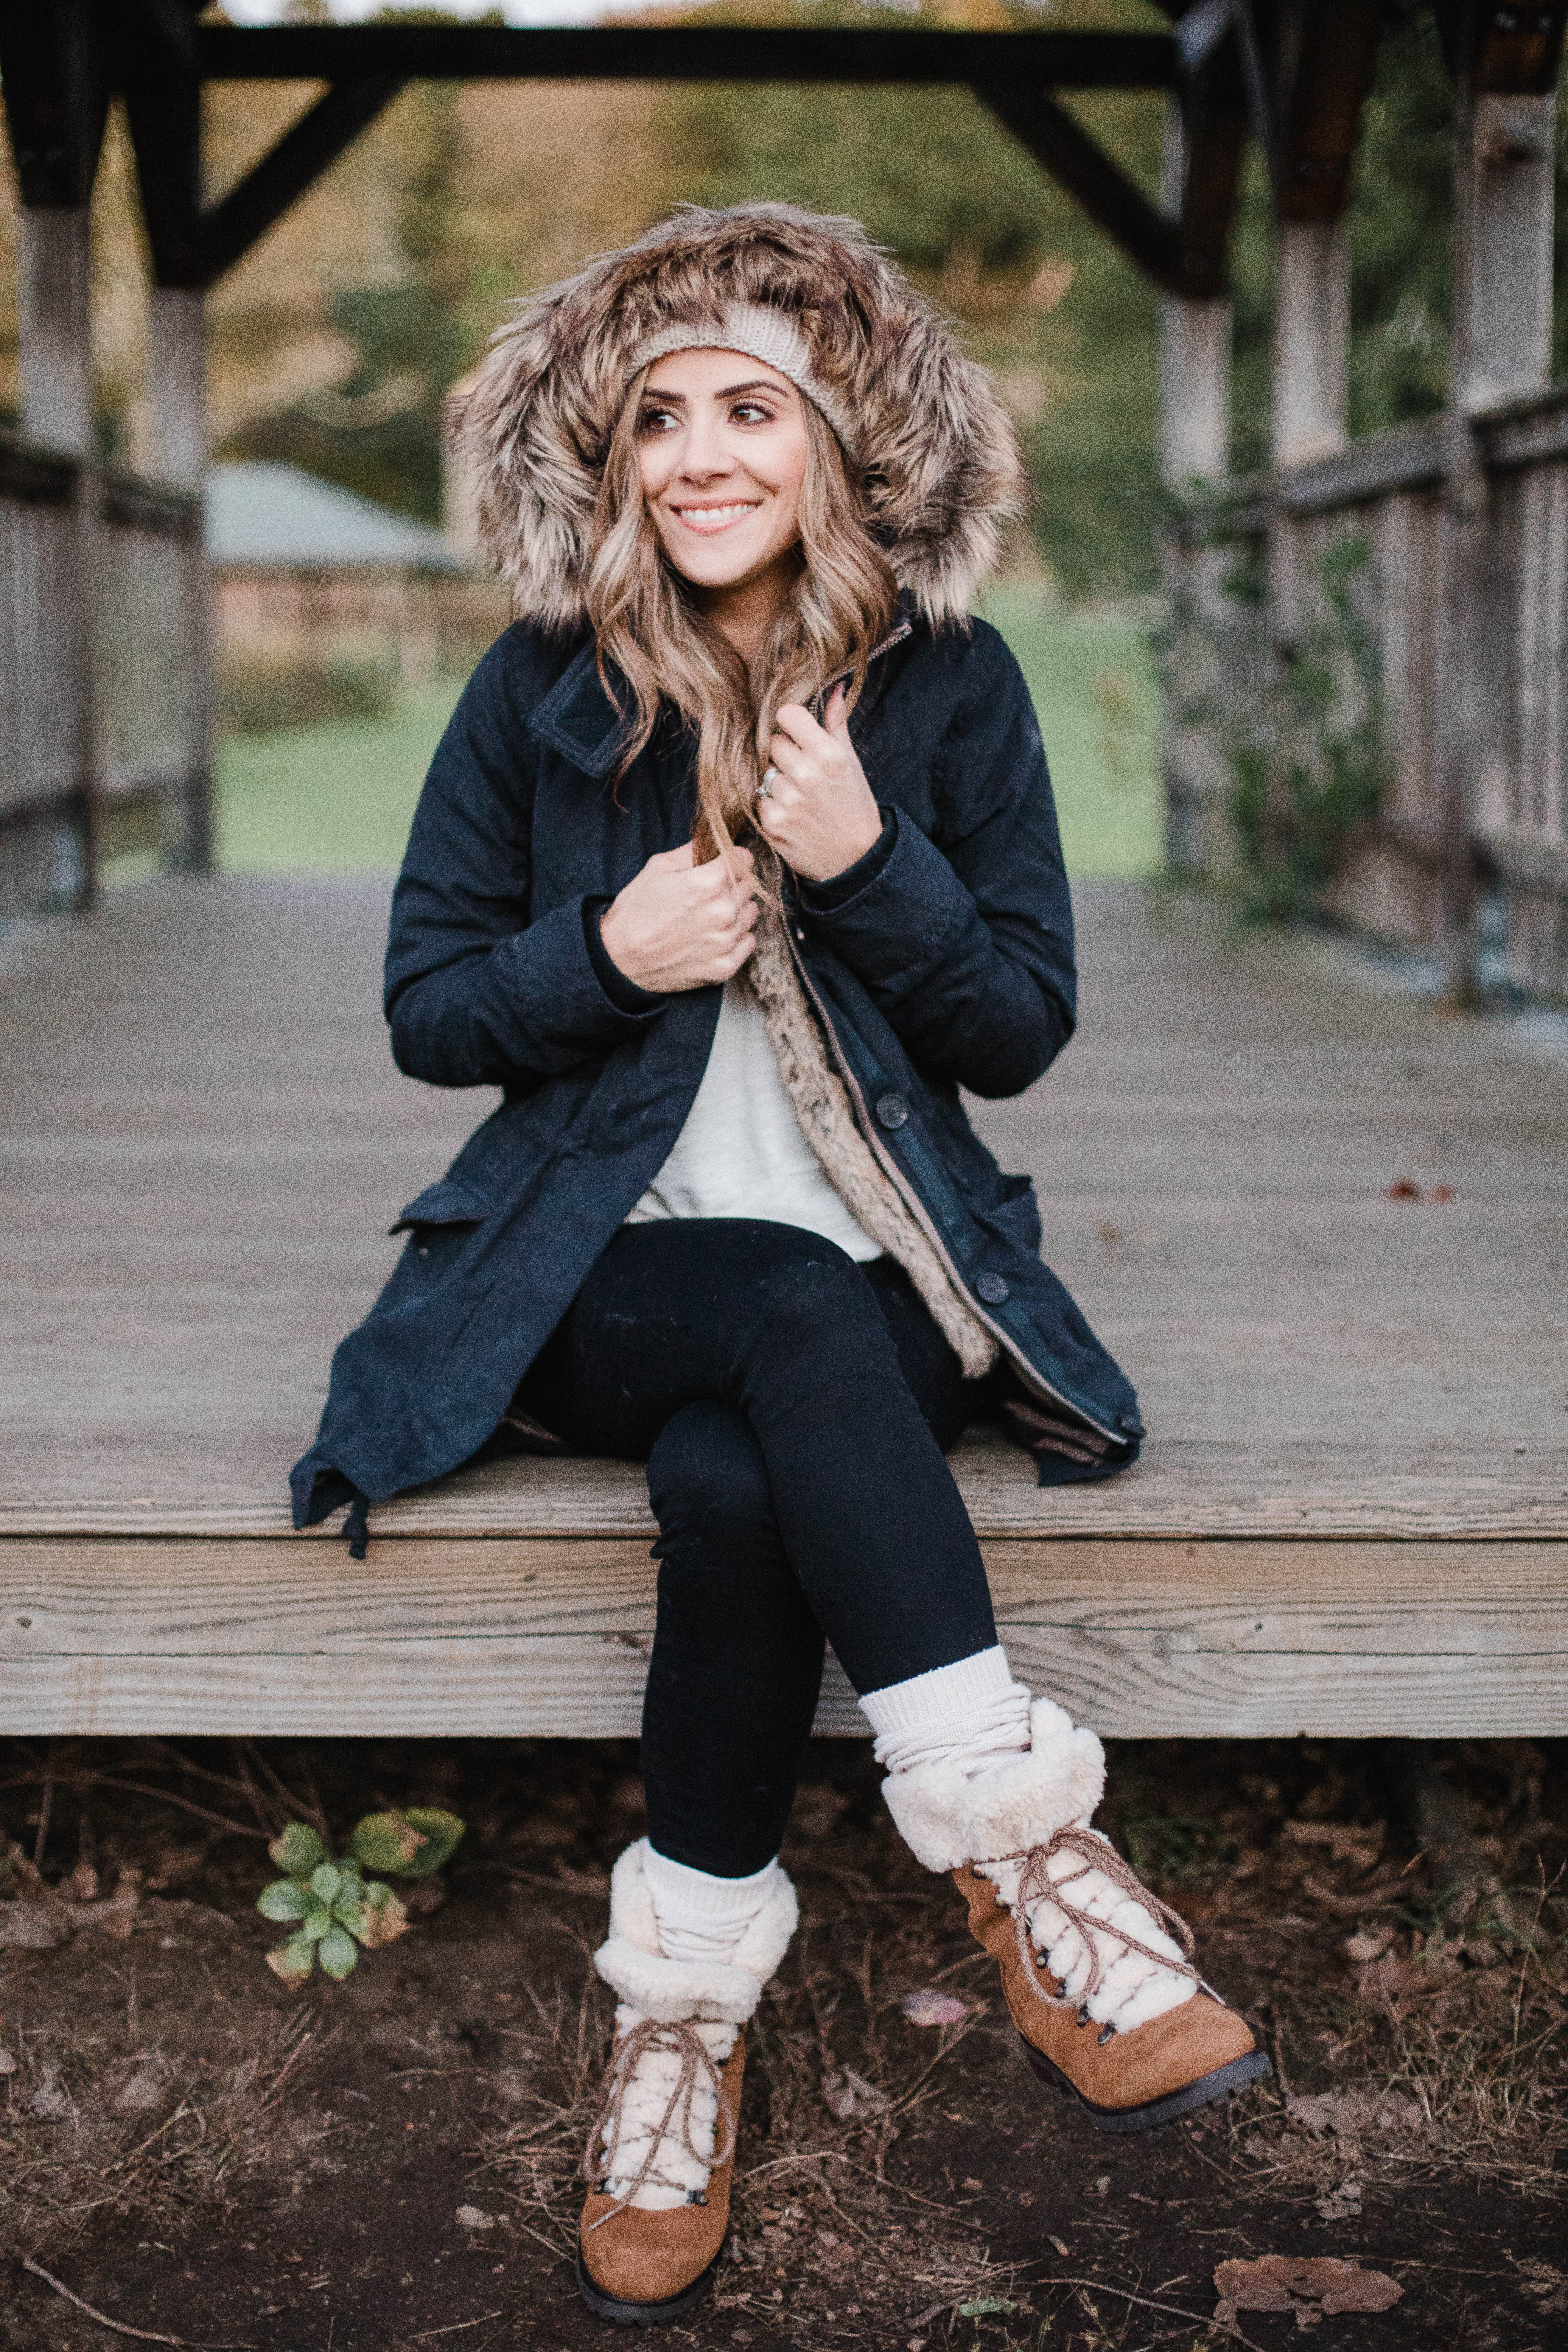 Connecticut life and style blogger Lauren McBride shares her Cold Weather Essentials and some high quality options from Abercrombie & Fitch.